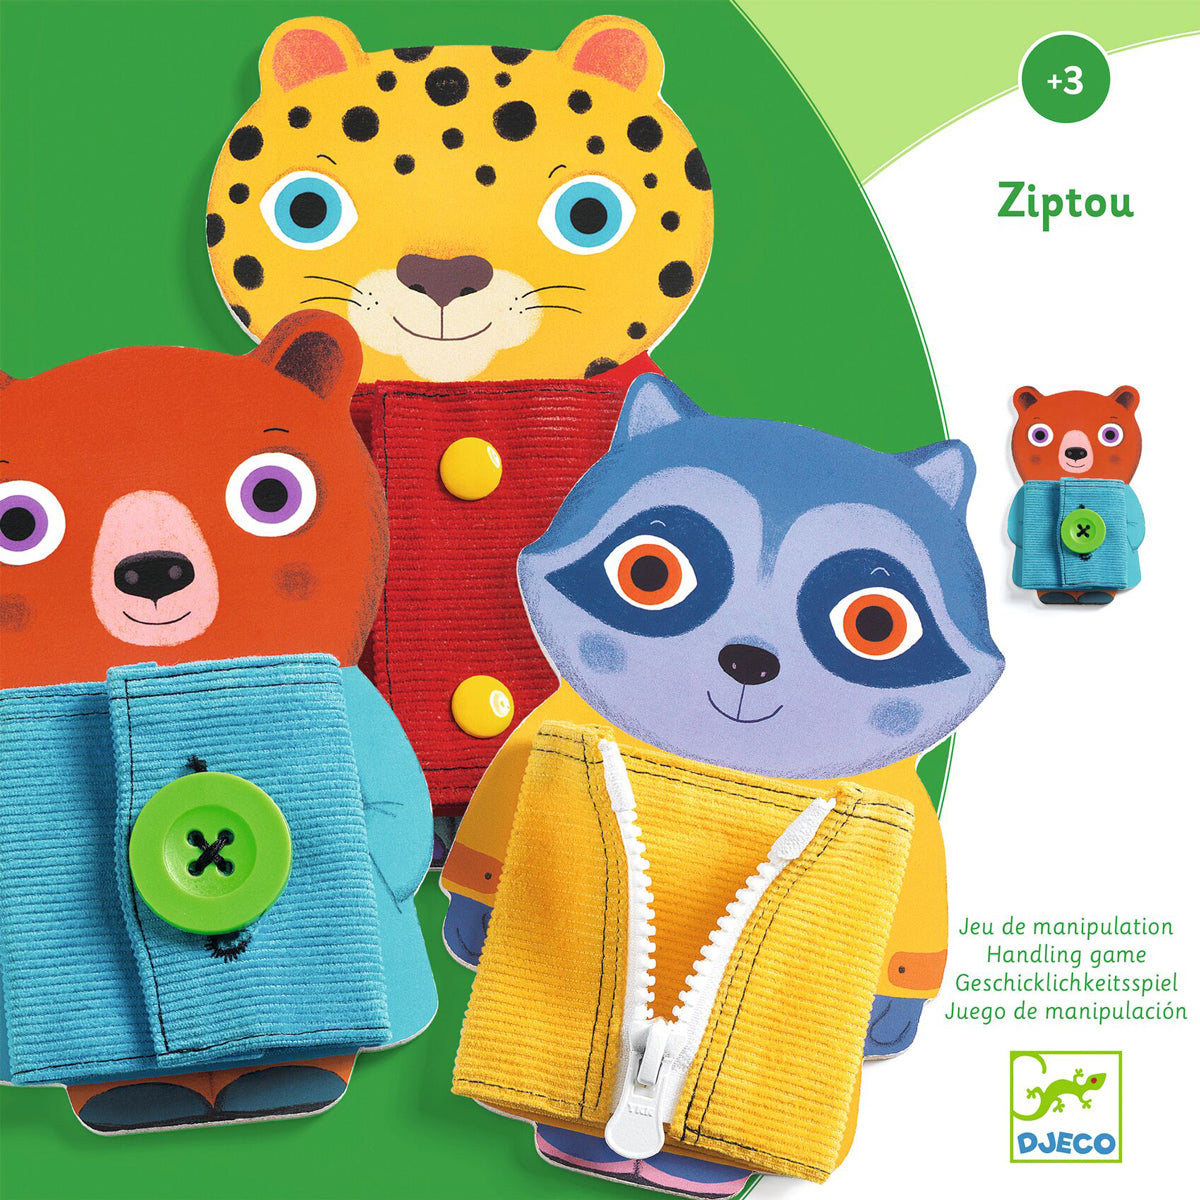 Djeco Ziptou zips buttons and poppers toys for 3 years old DJ01663